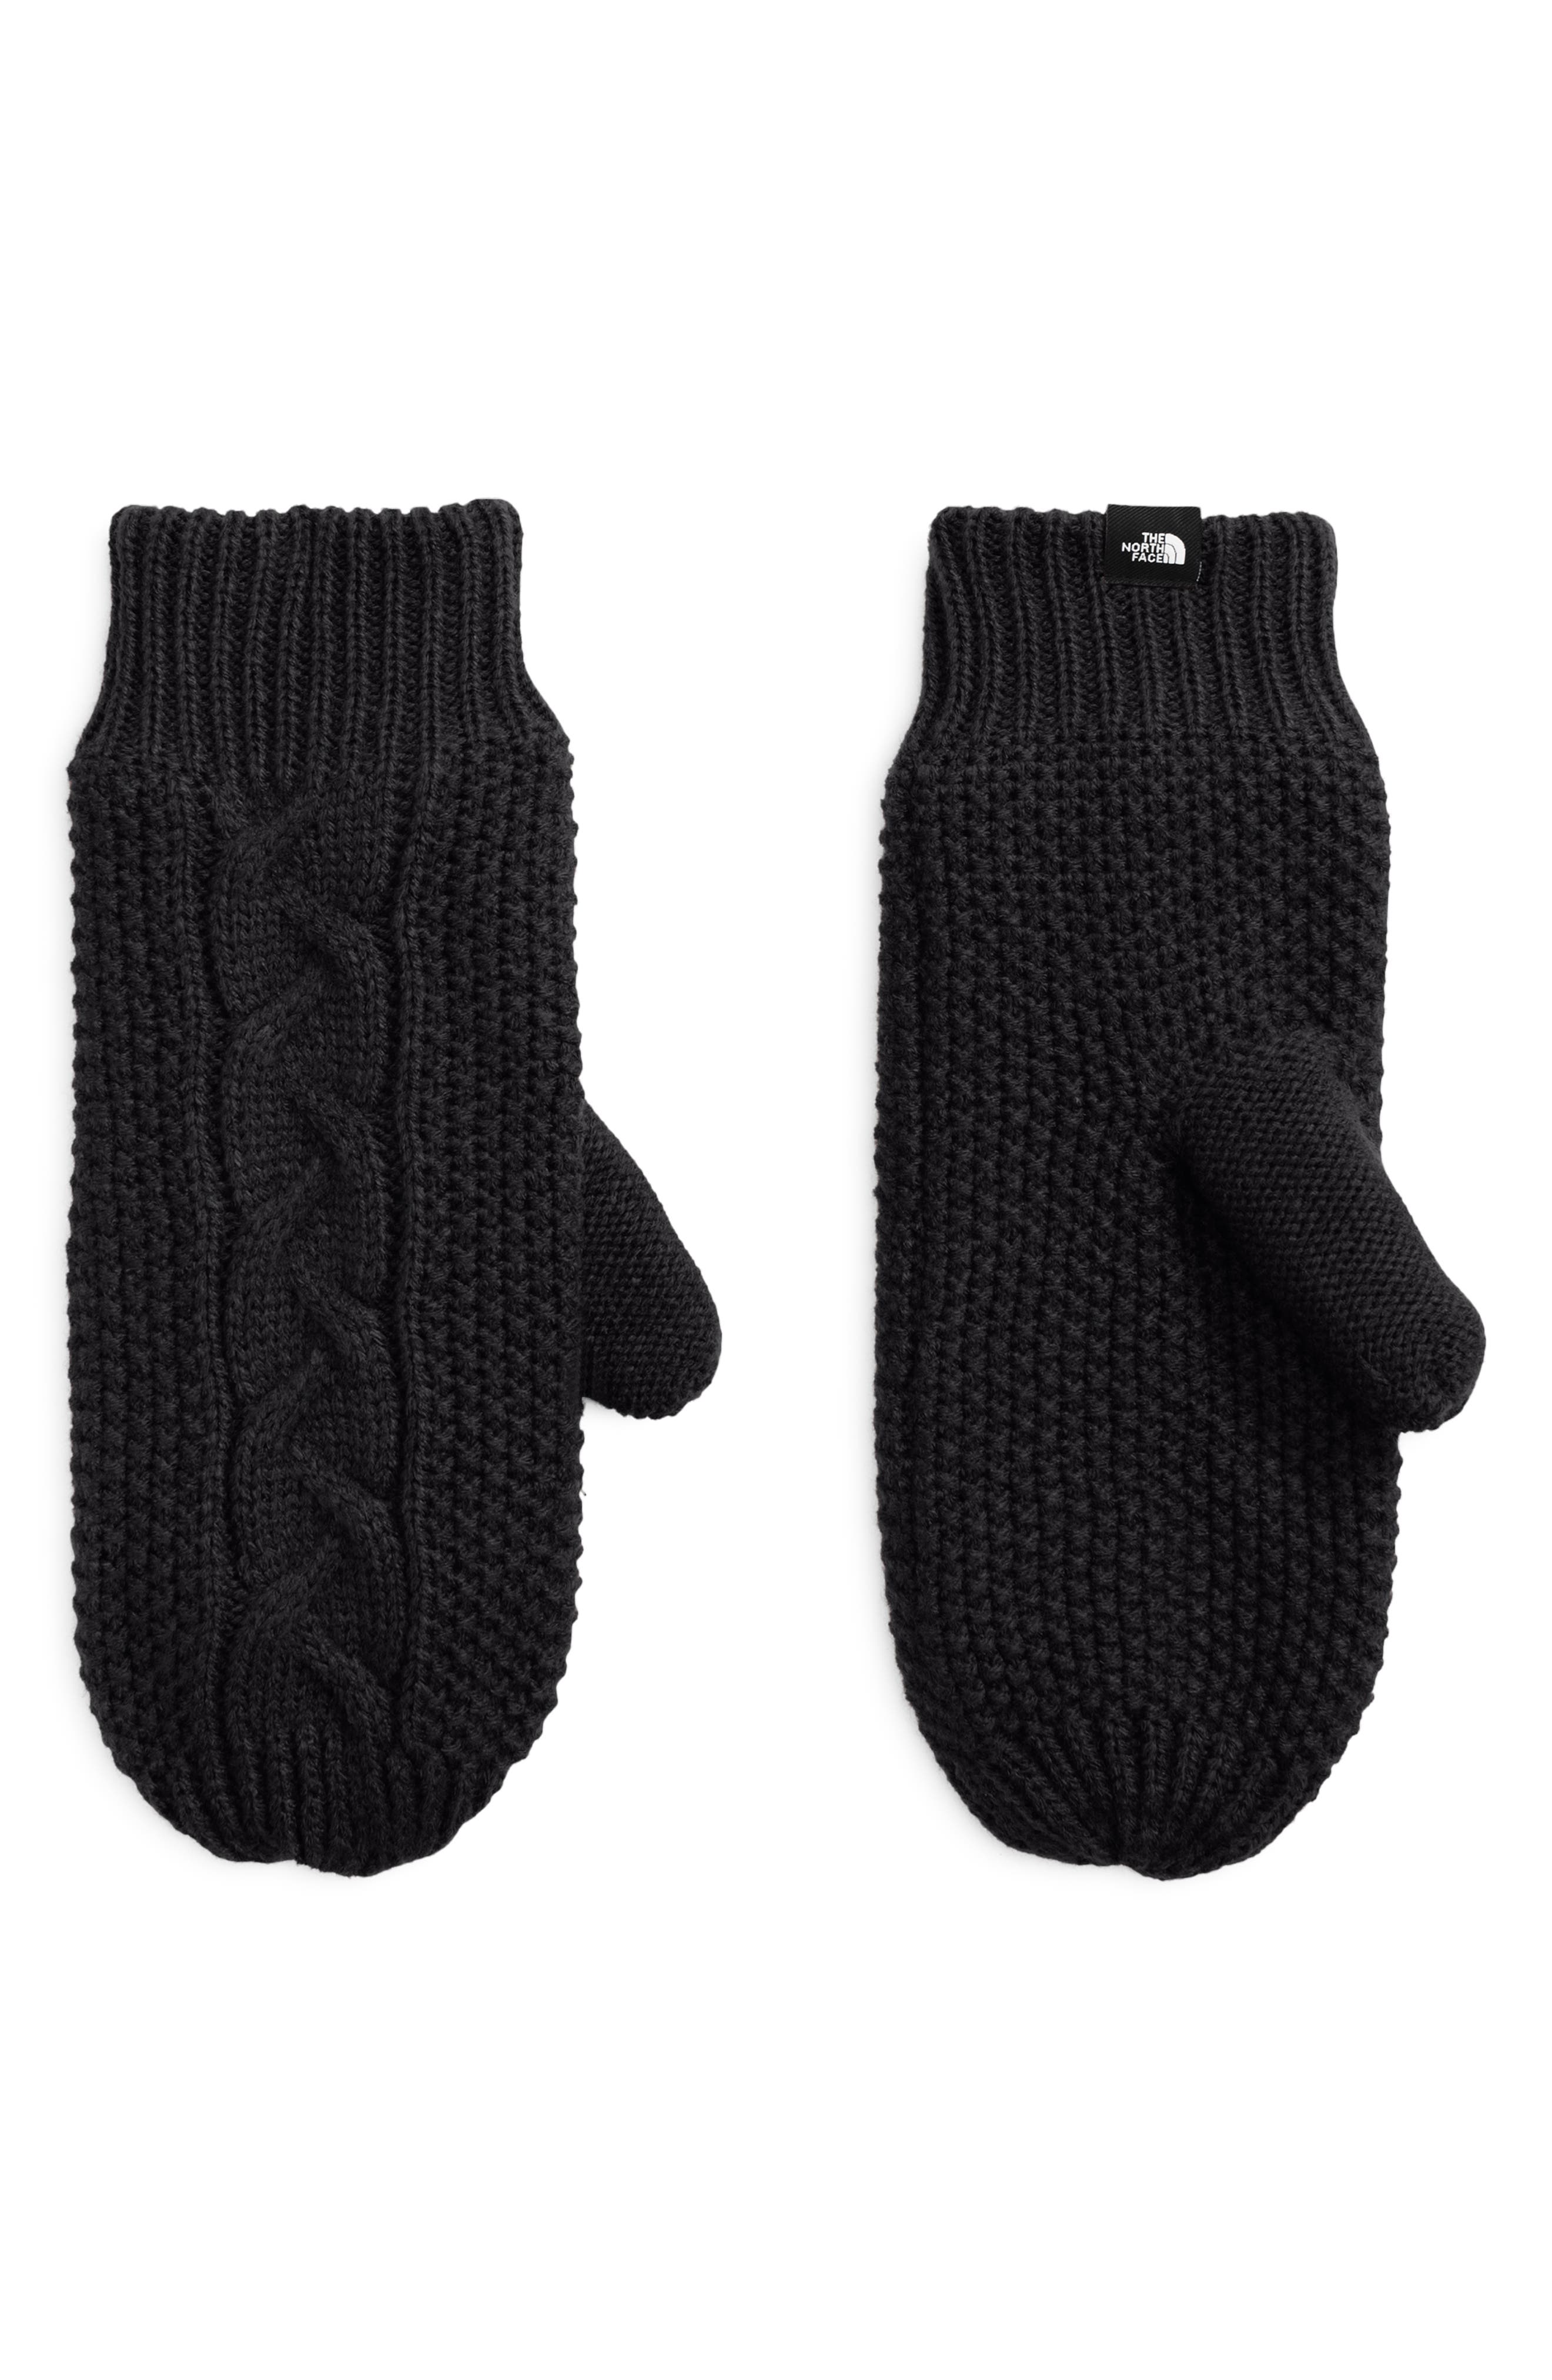 north face knit mittens